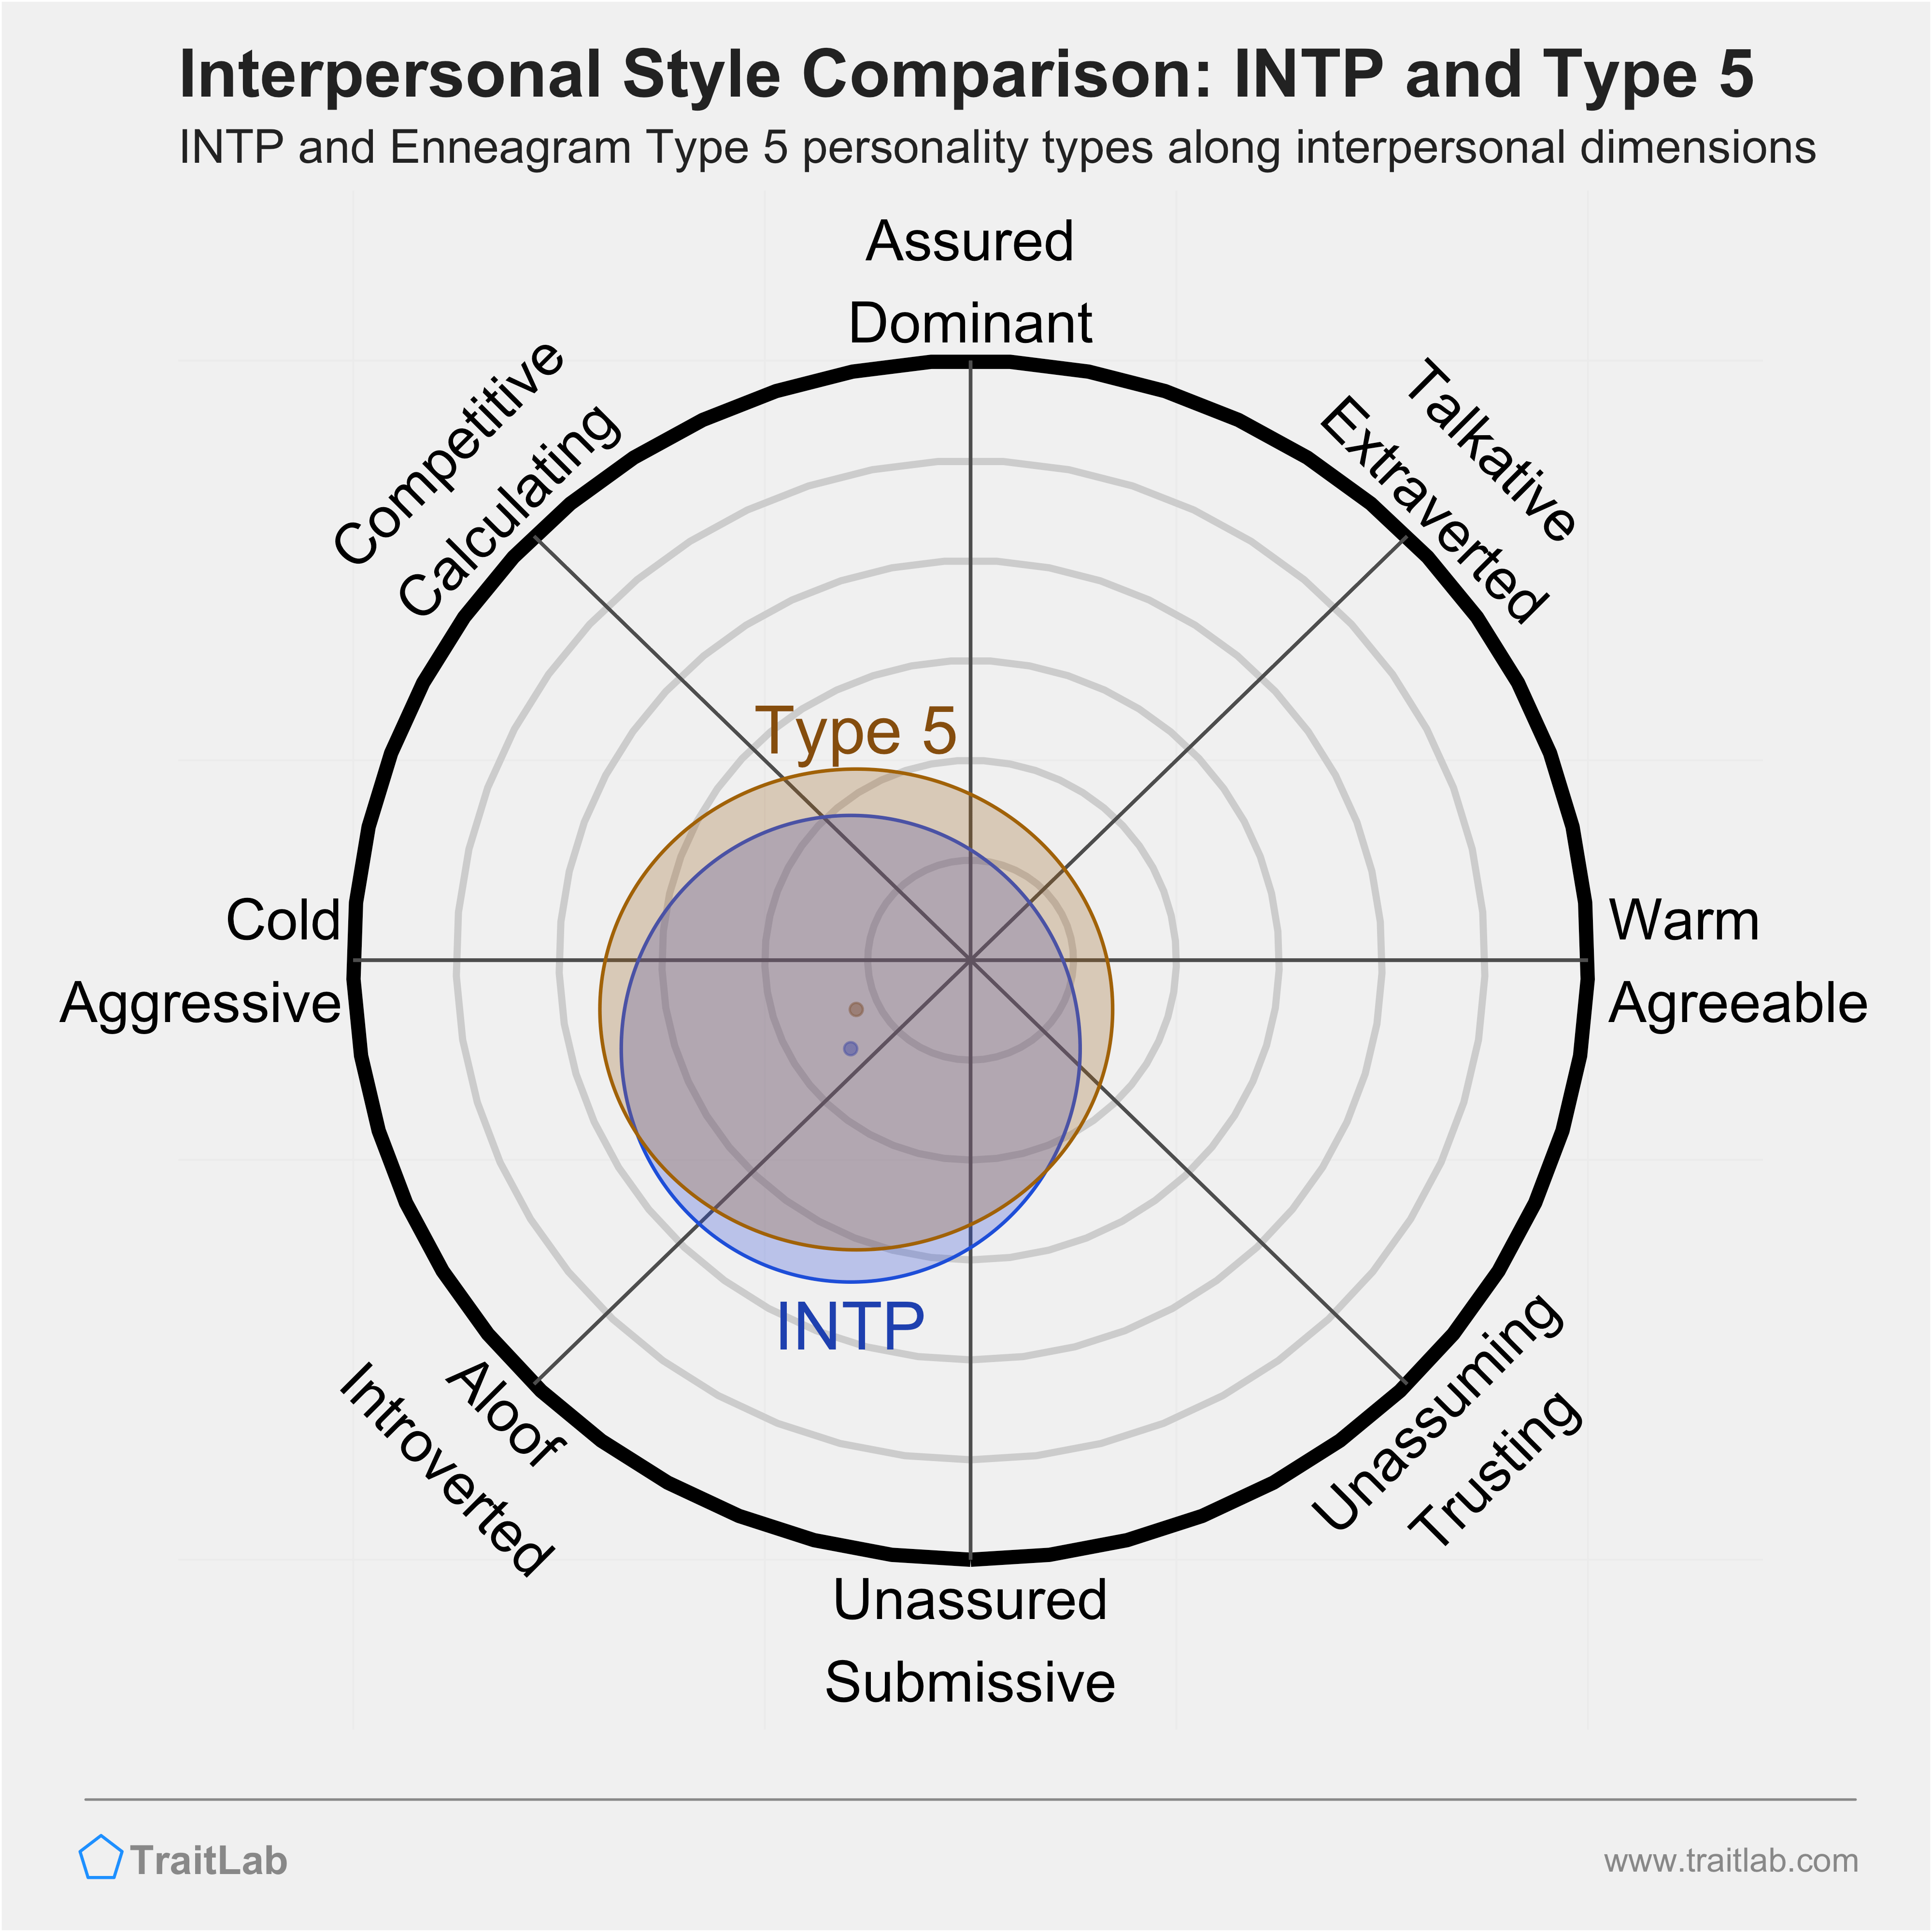 Enneagram INTP and Type 5 comparison across interpersonal dimensions